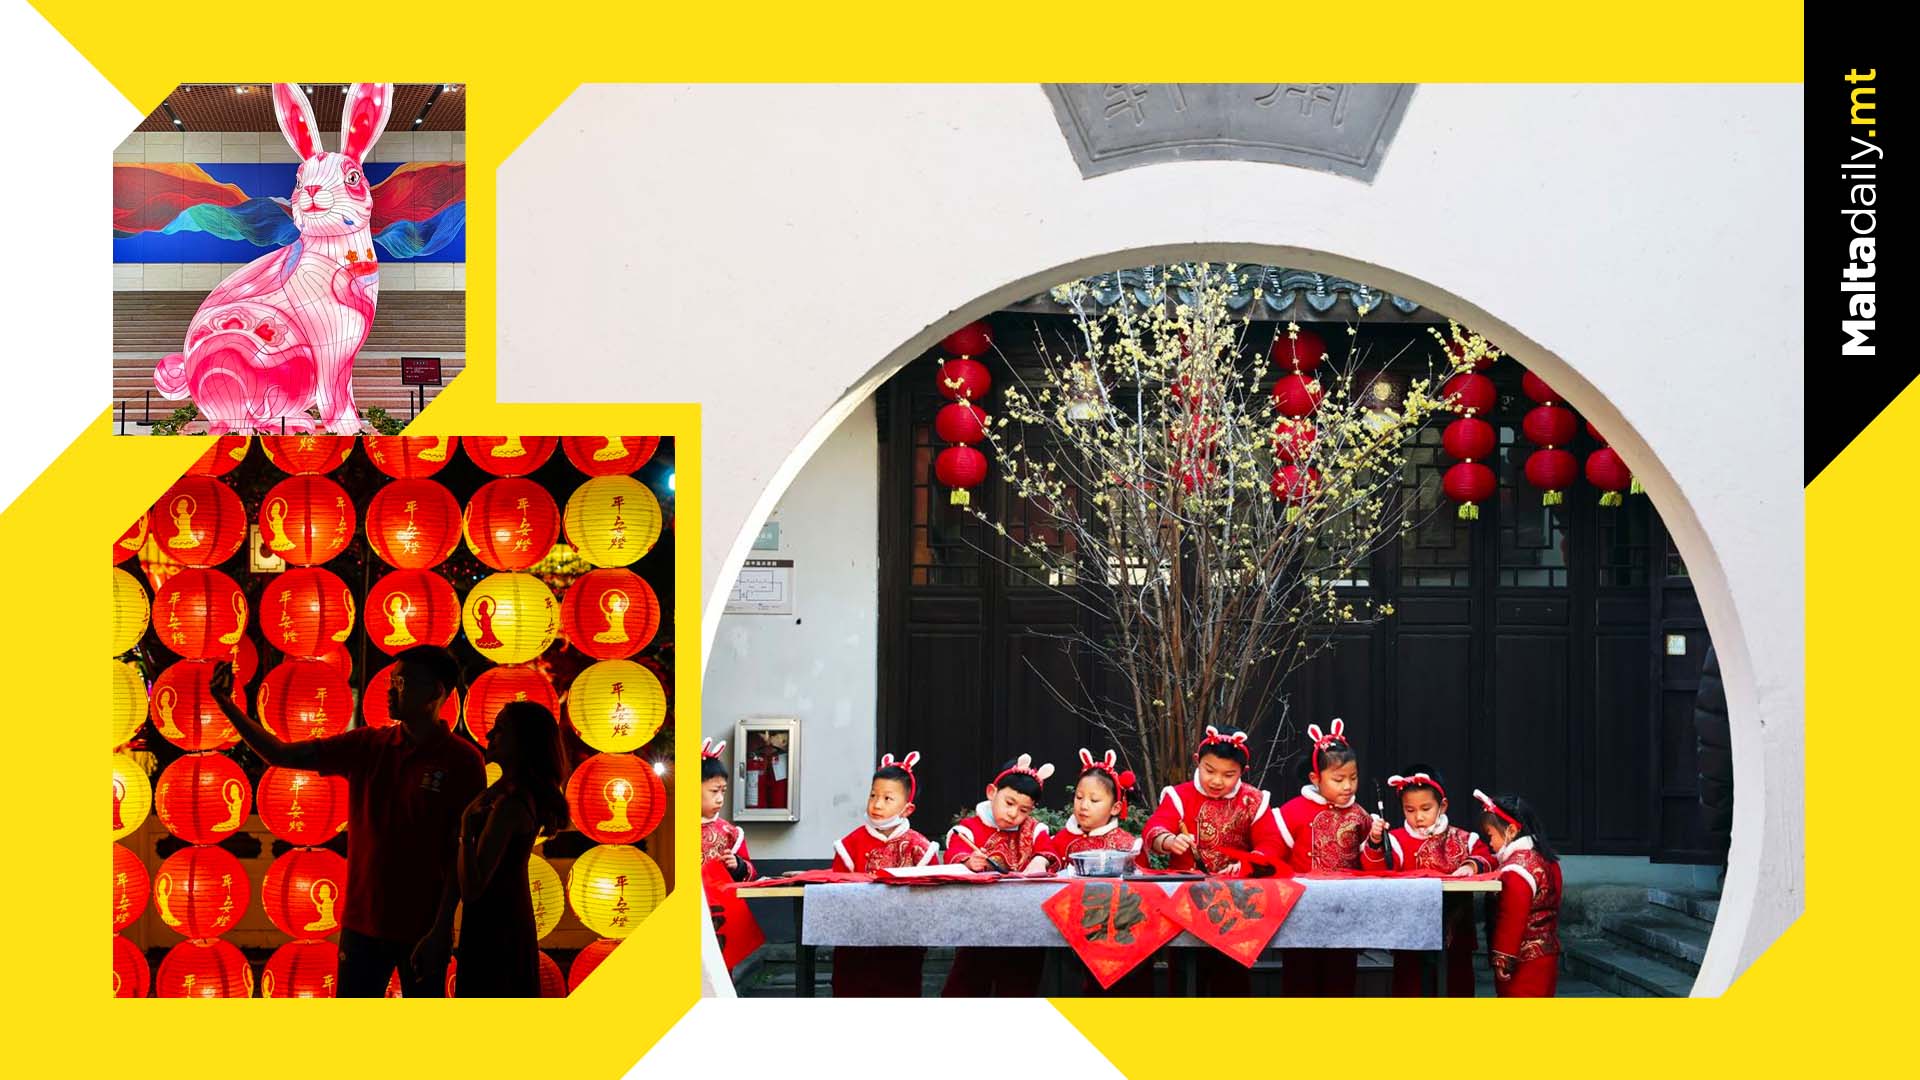 Lunar New Year celebrations in China after 3 years of restrictions